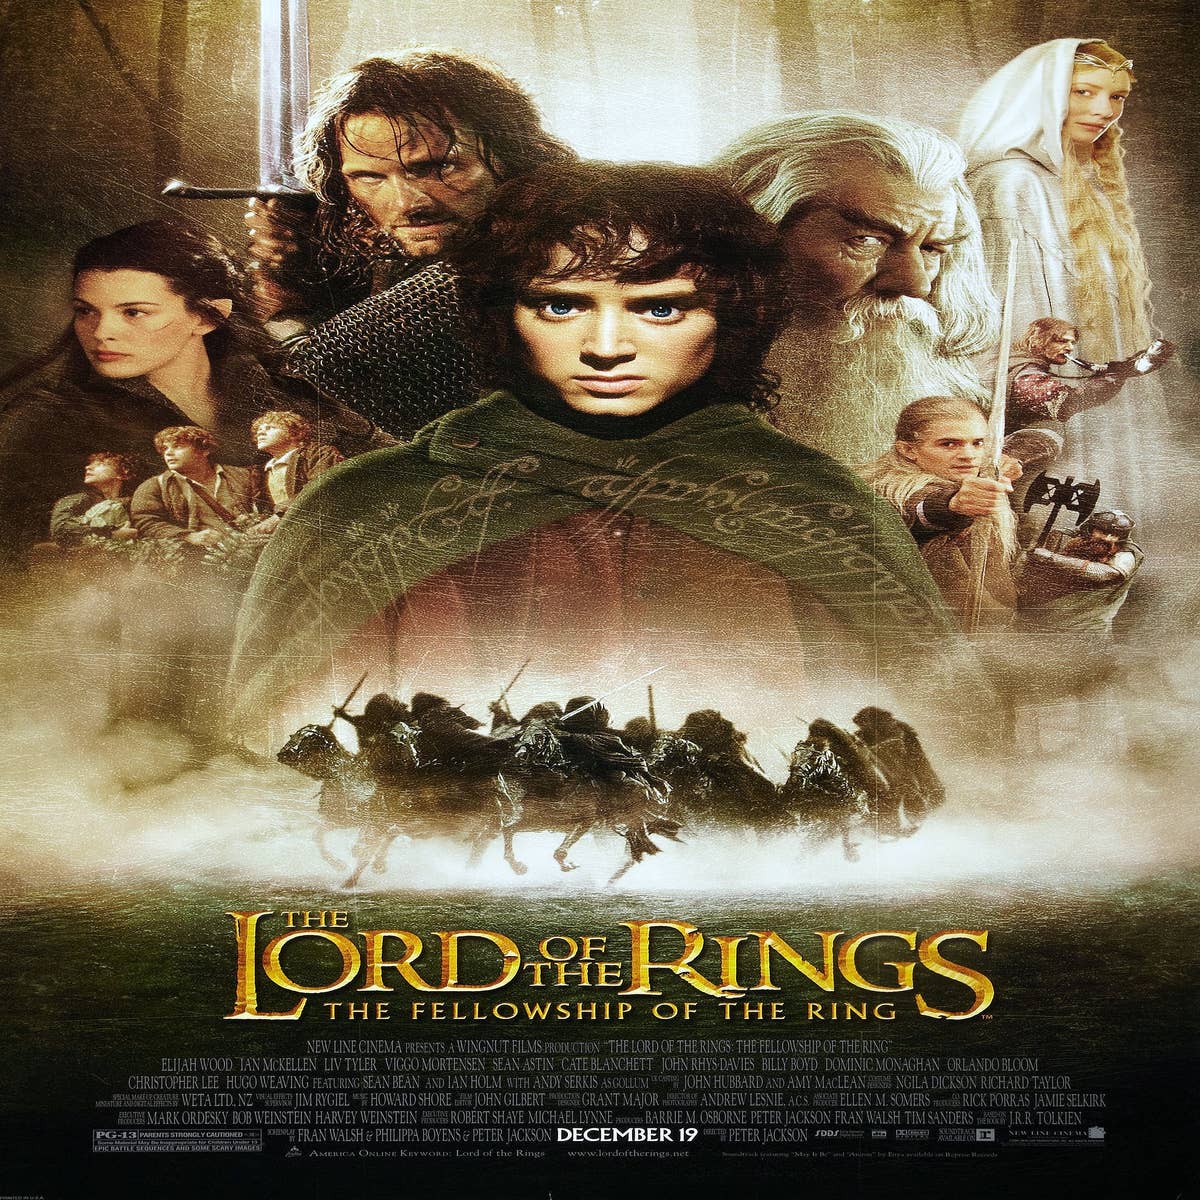 The Lord of the Rings: The War of the Rohirrim: New movie to be released  after  series - Movie & Show News